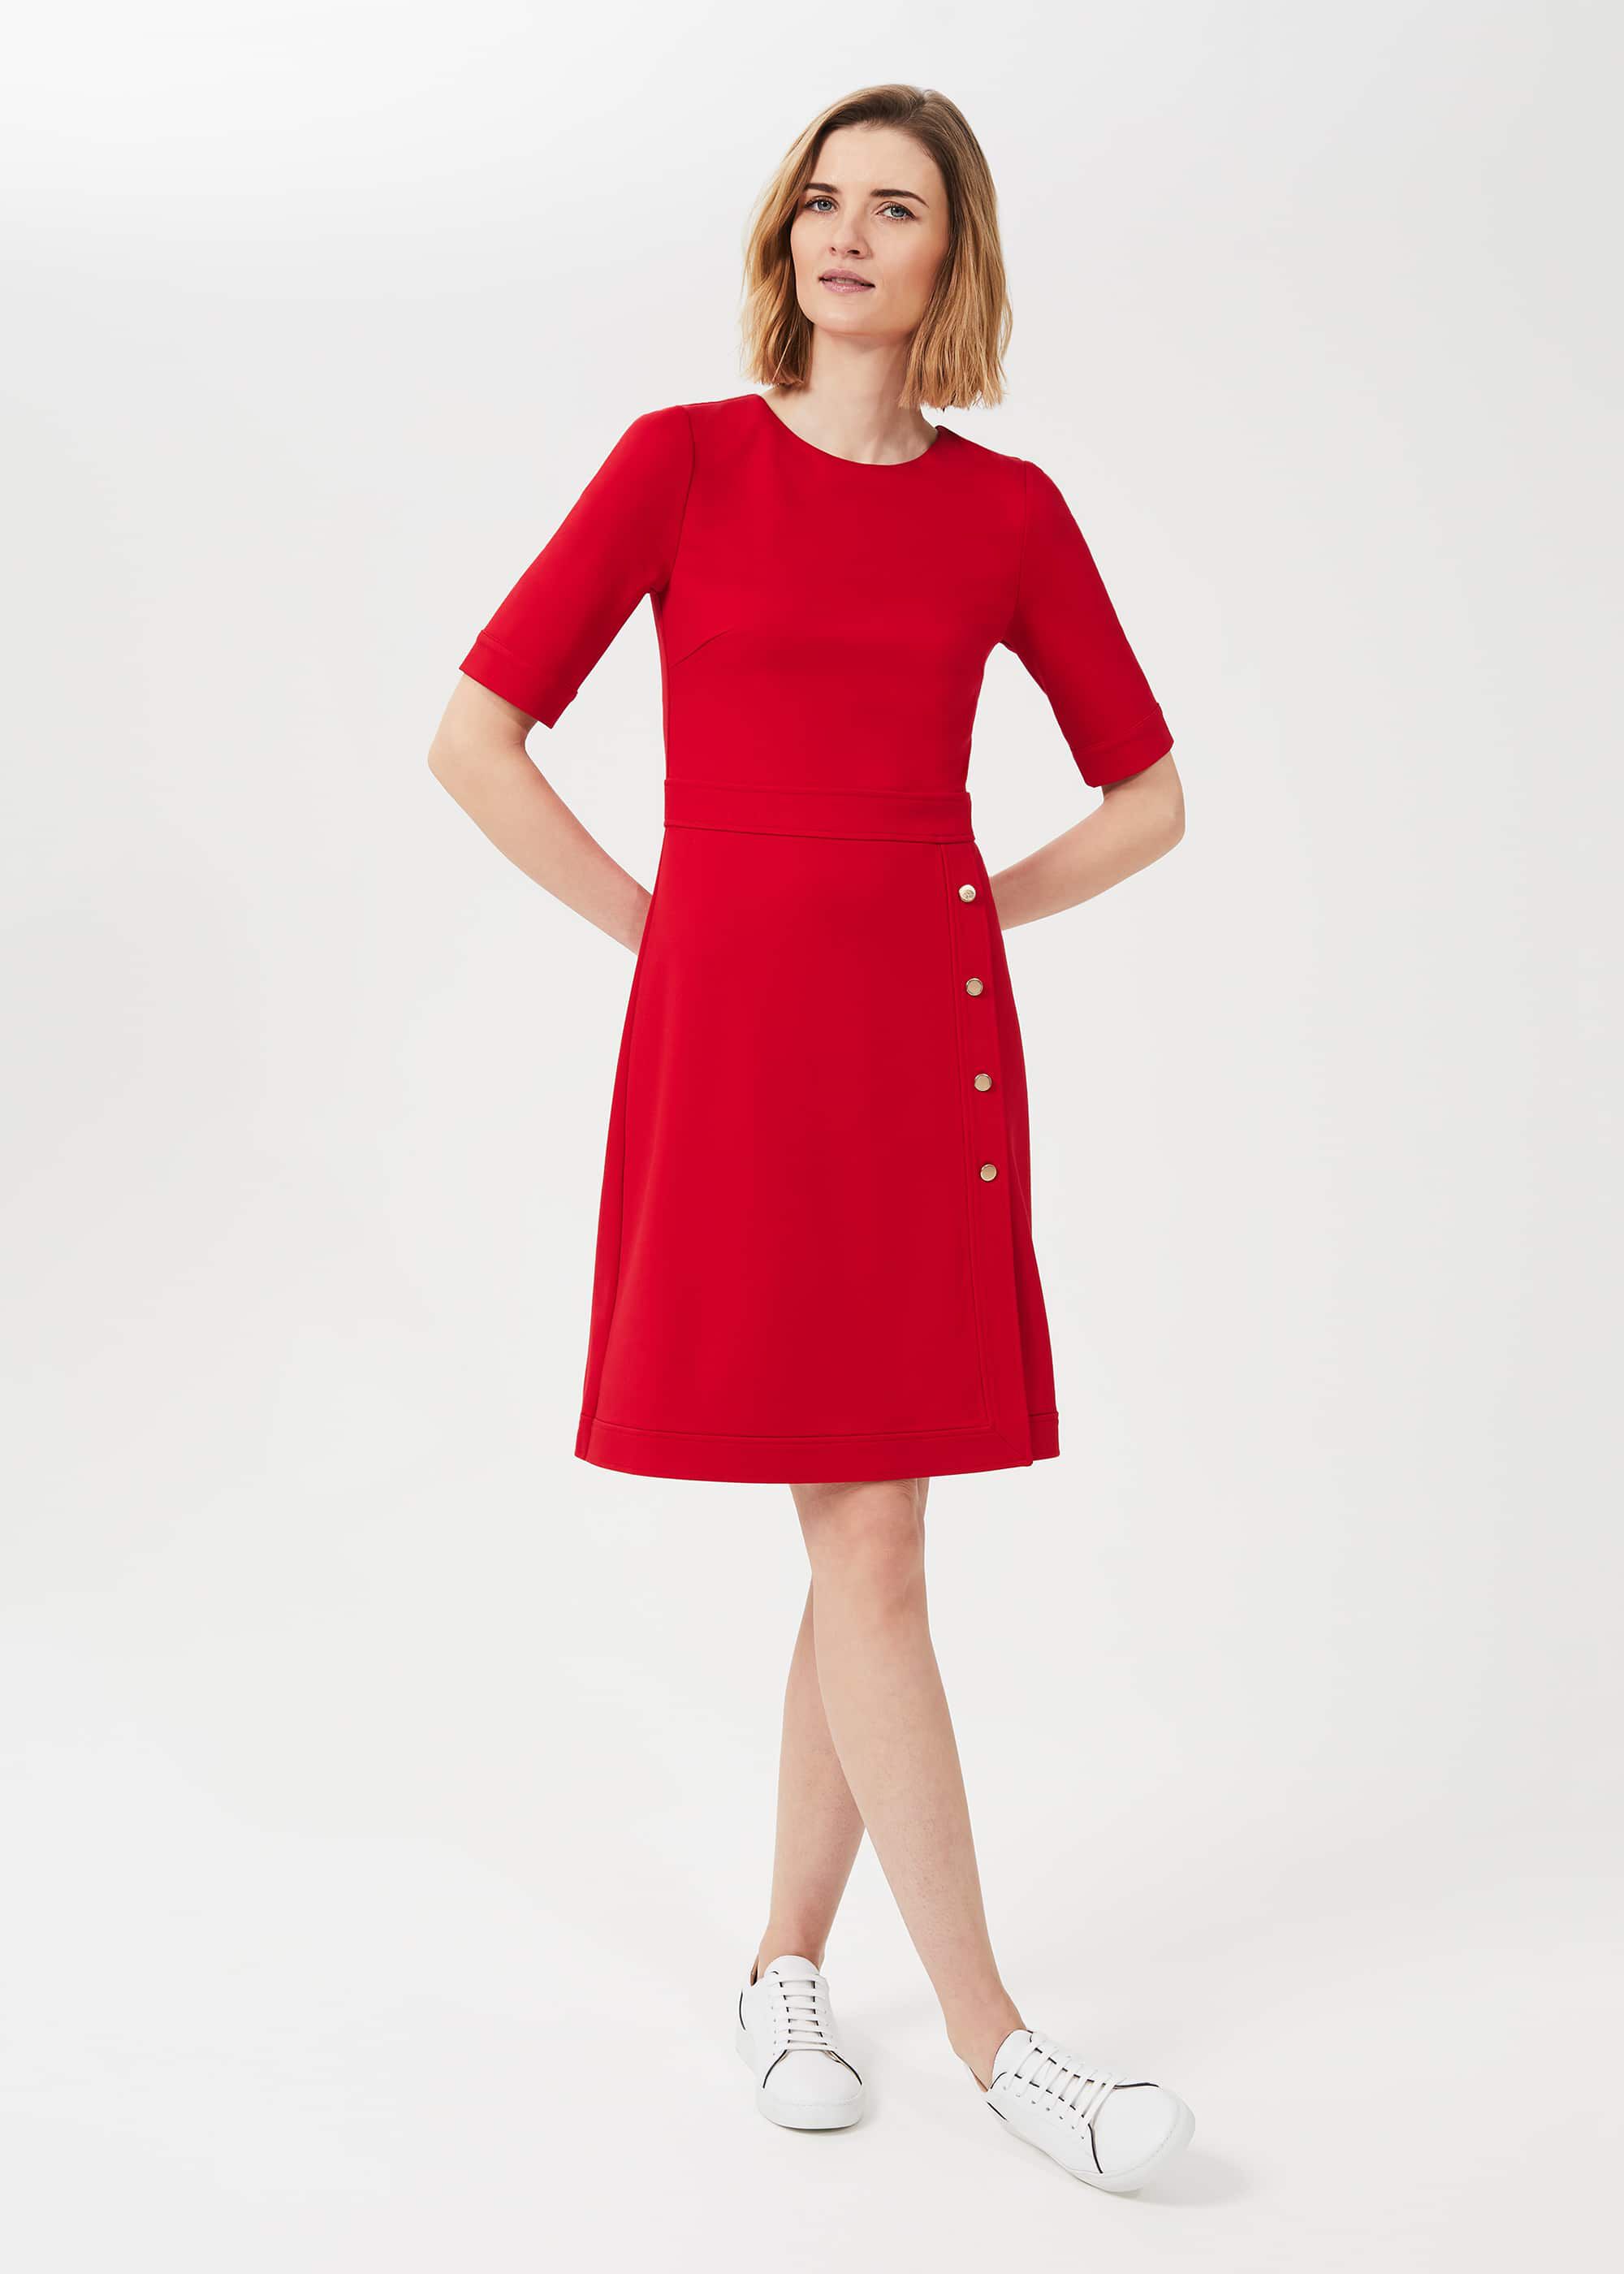 Hobbs Hobbs Red Anela Dress Thick Jersey Retro Style 60s Flag Red Fit Flare UK 12 BNWT 